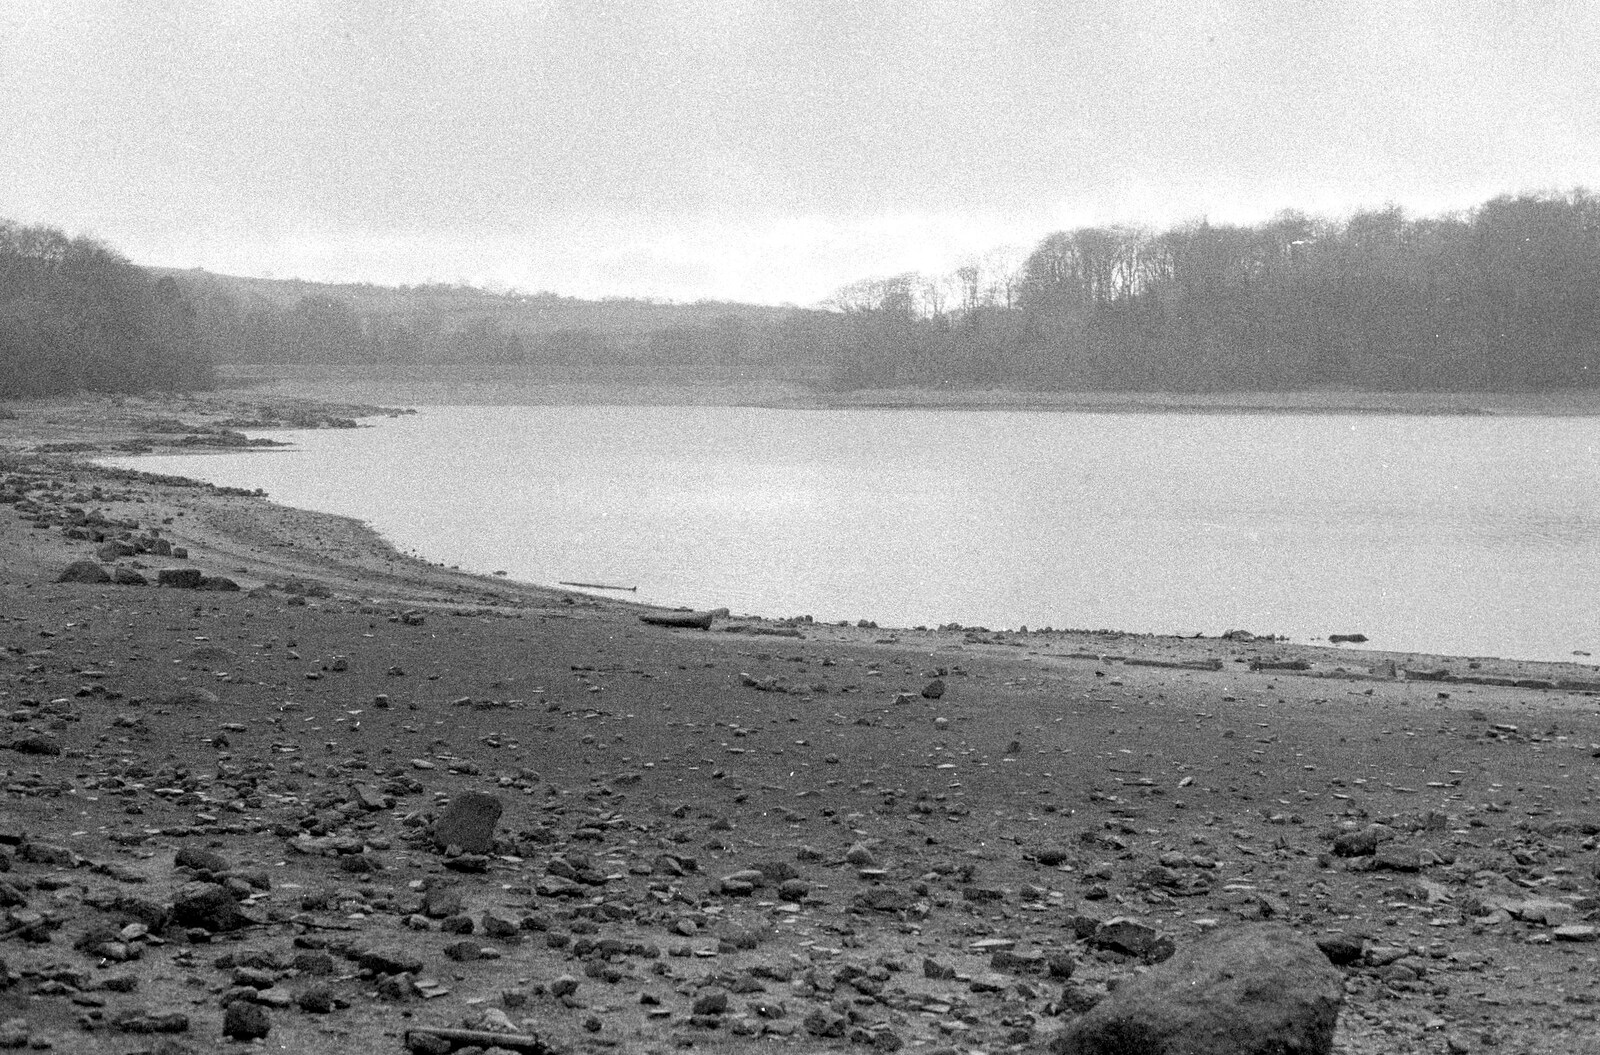 Burrator resevoir from Sis's Nearly-Christmas Wedding, Meavy, Dartmoor - 20th December 2003